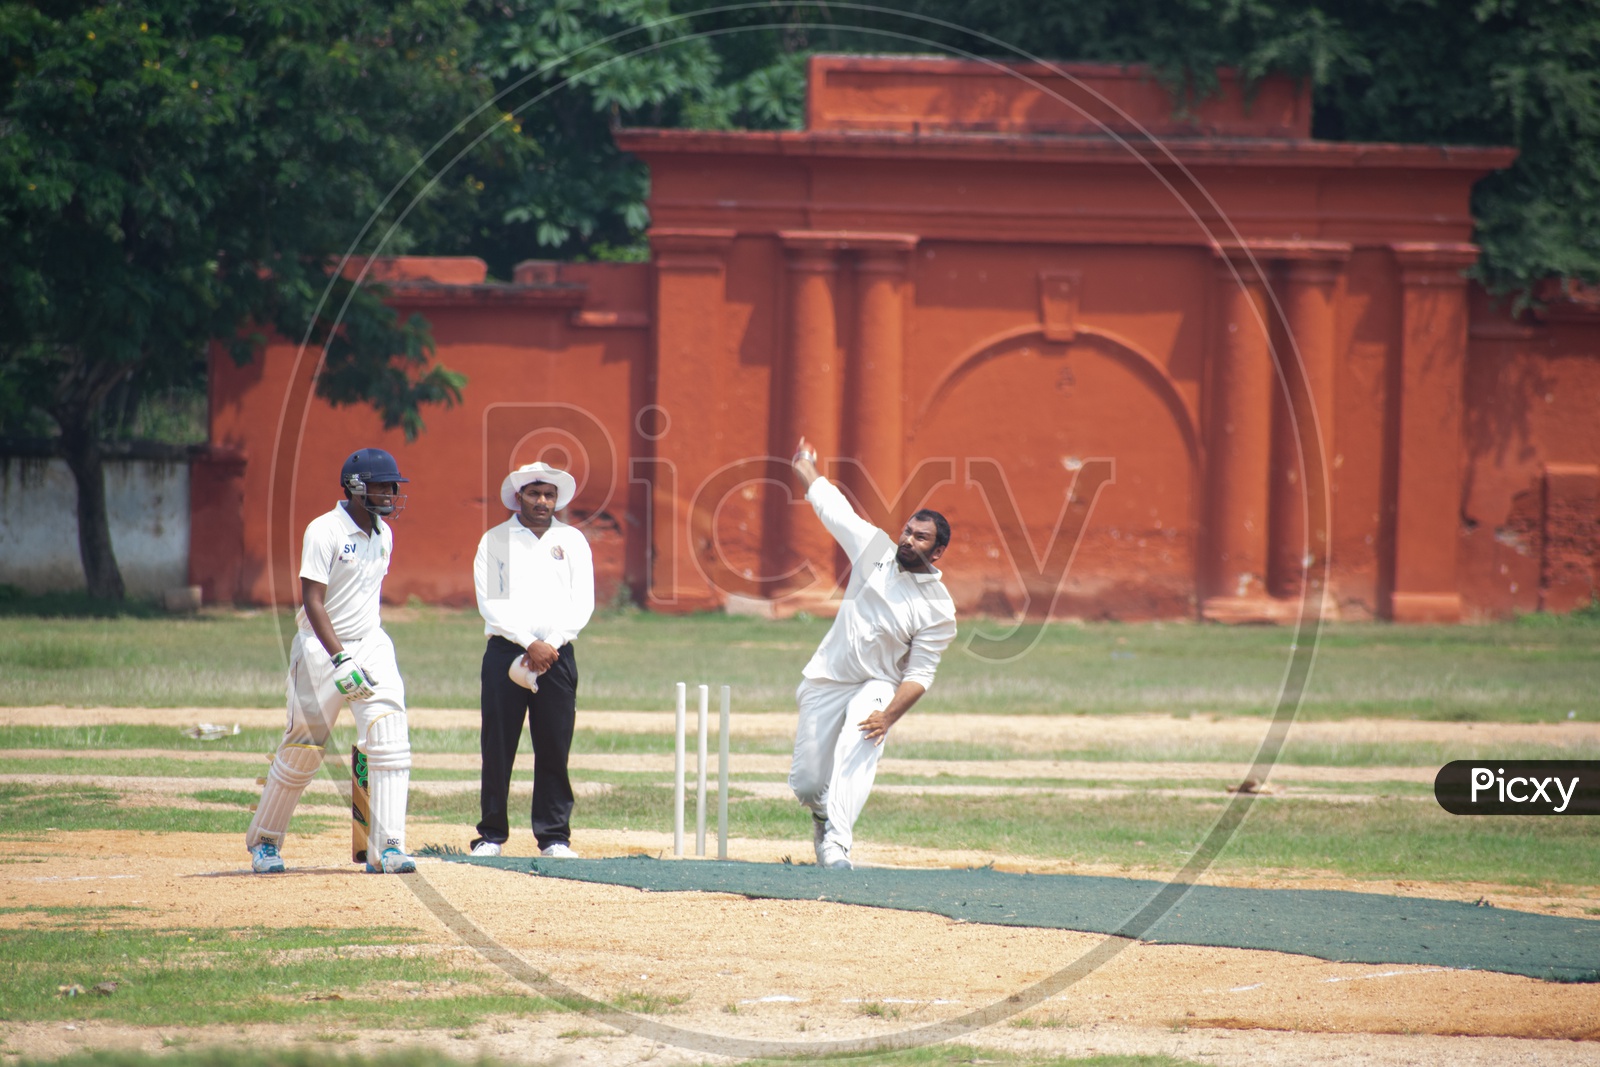 A bowler is bowling on the Cricket field while the empire watch and the batsman ready to take a run